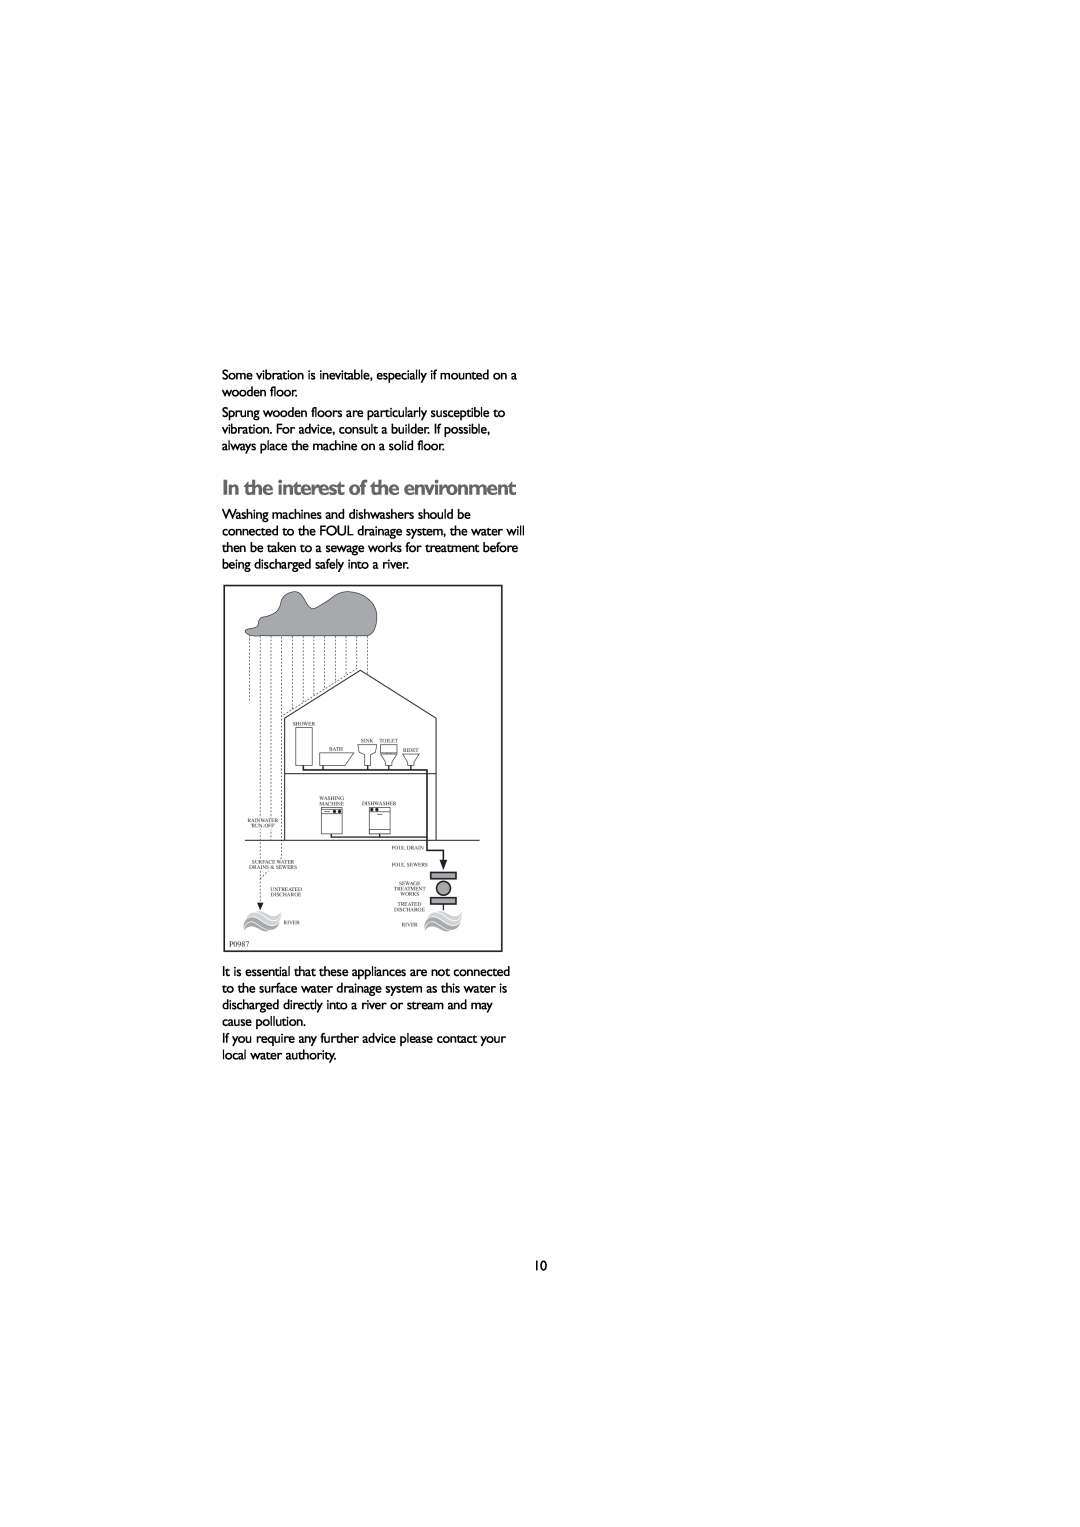 John Lewis JLWM 1203 instruction manual In the interest of the environment 